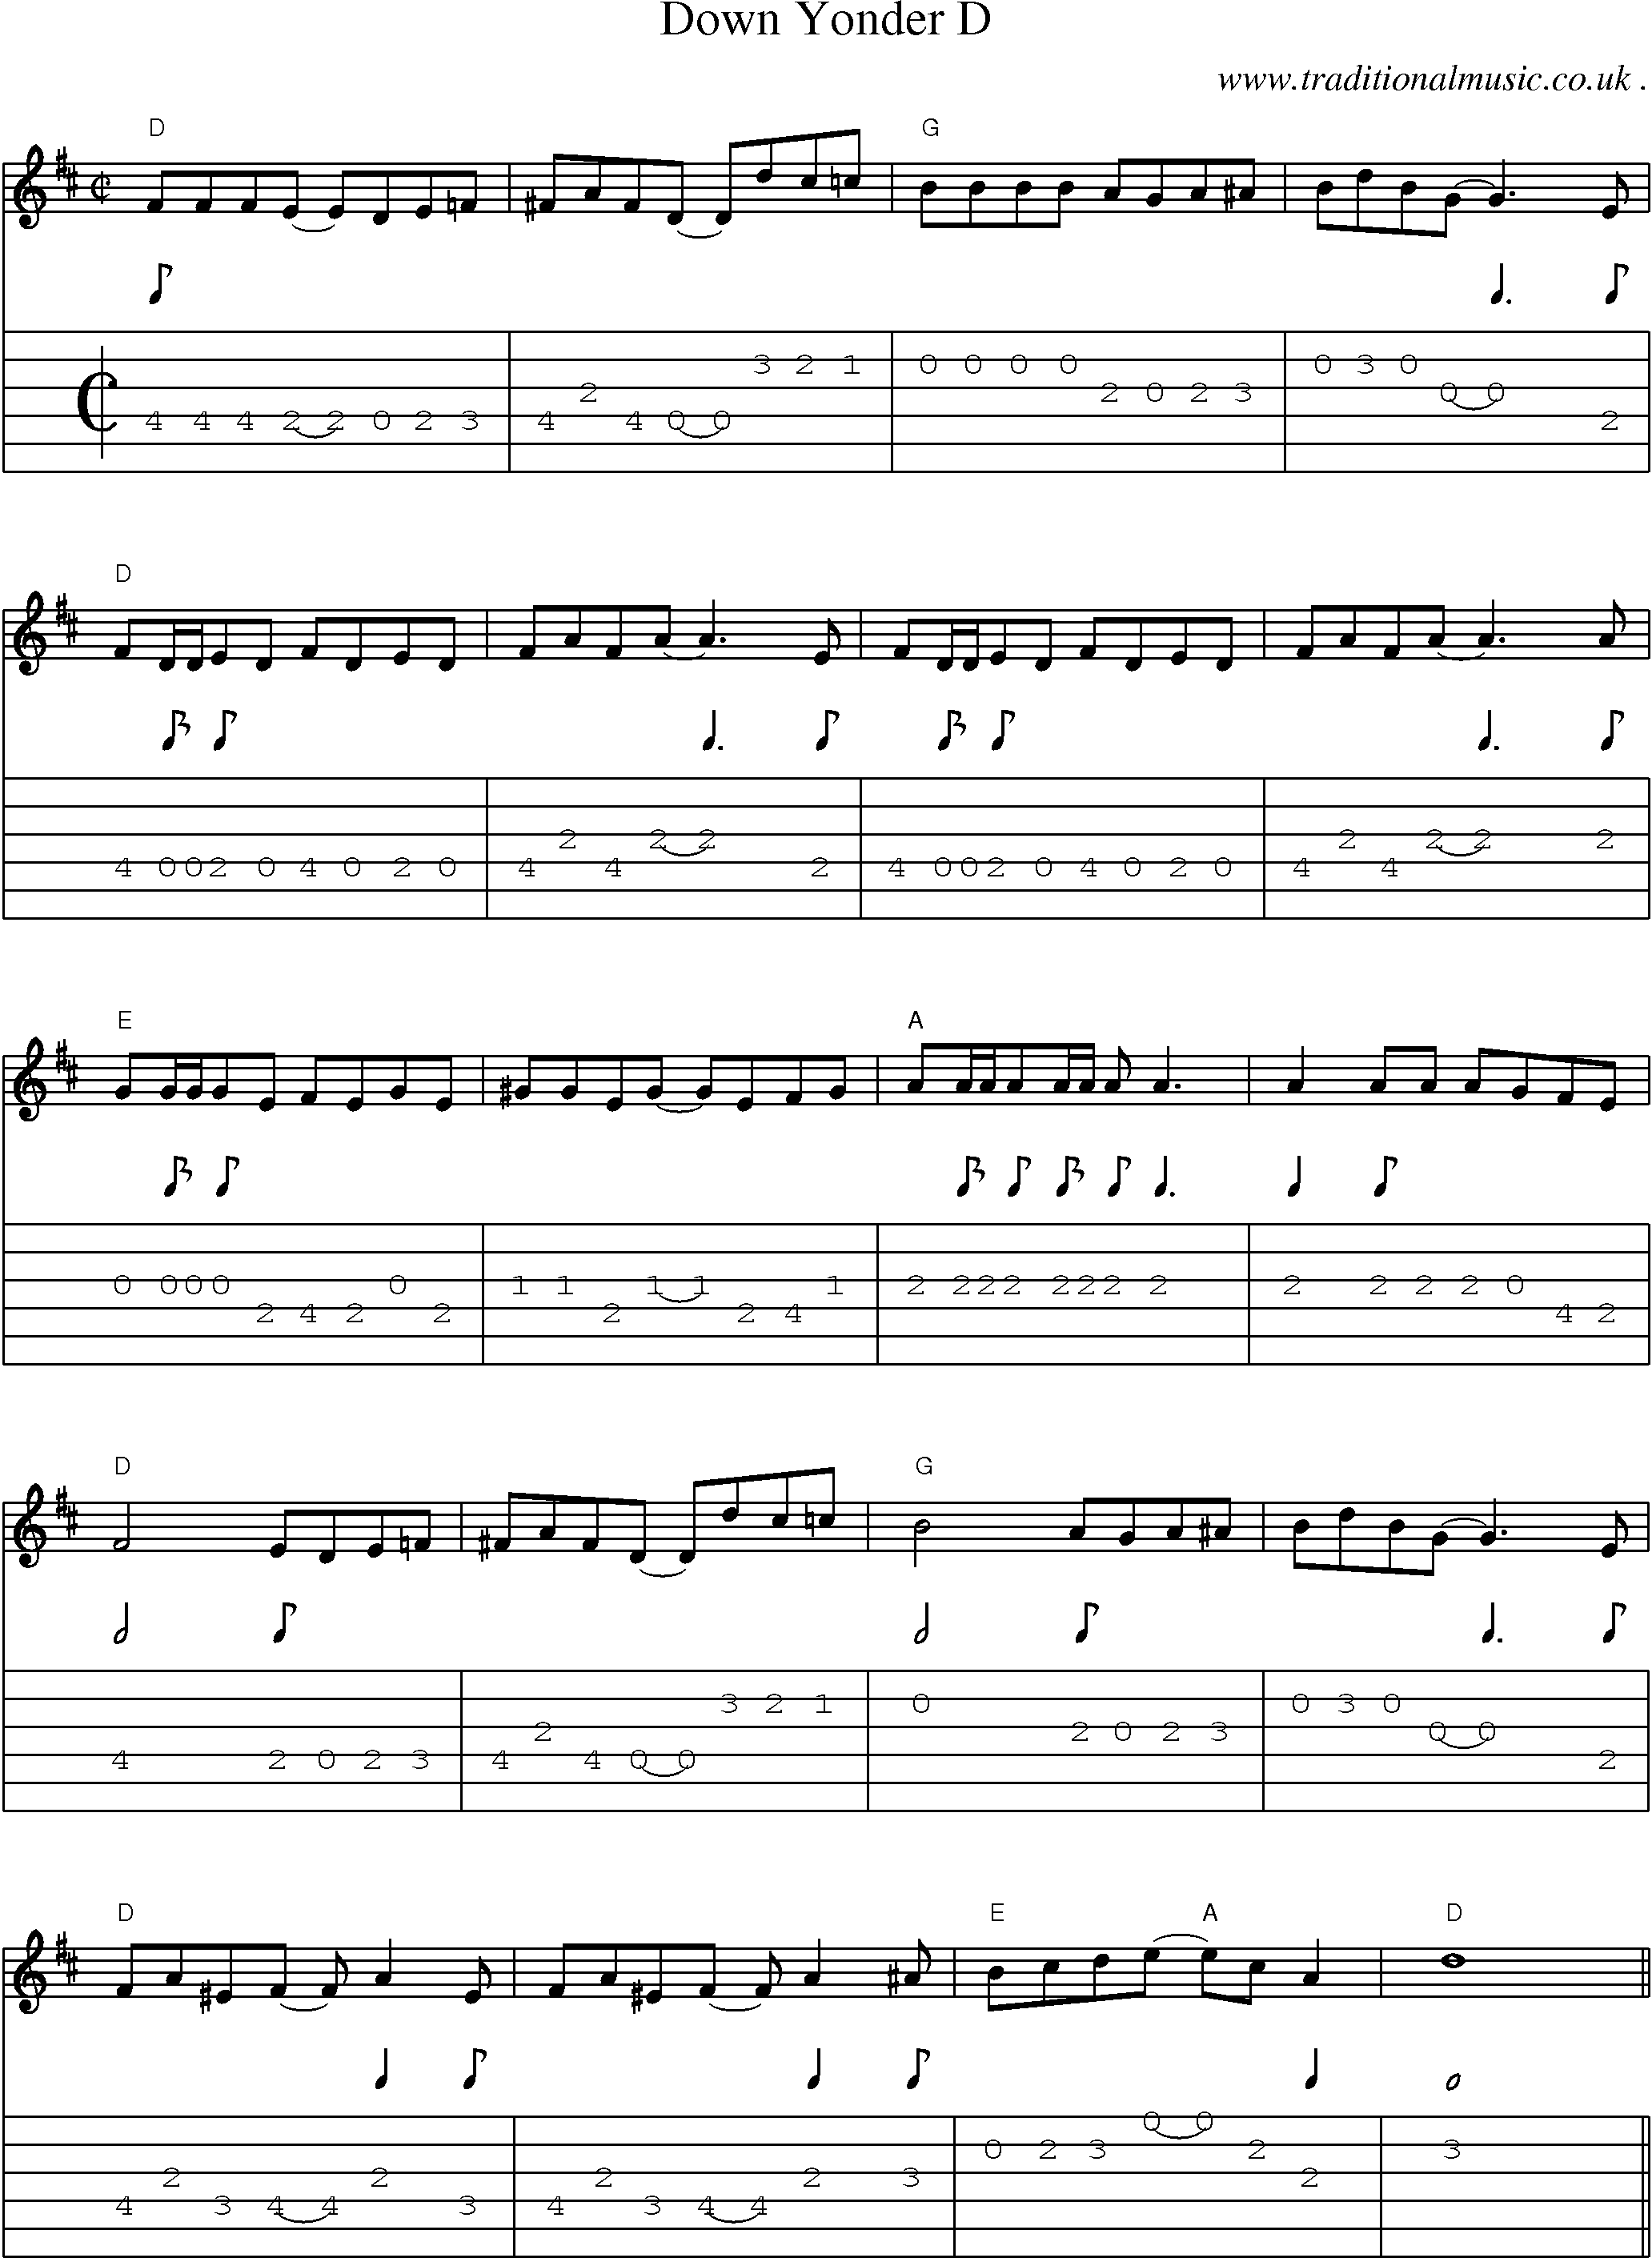 Music Score and Guitar Tabs for Down Yonder D